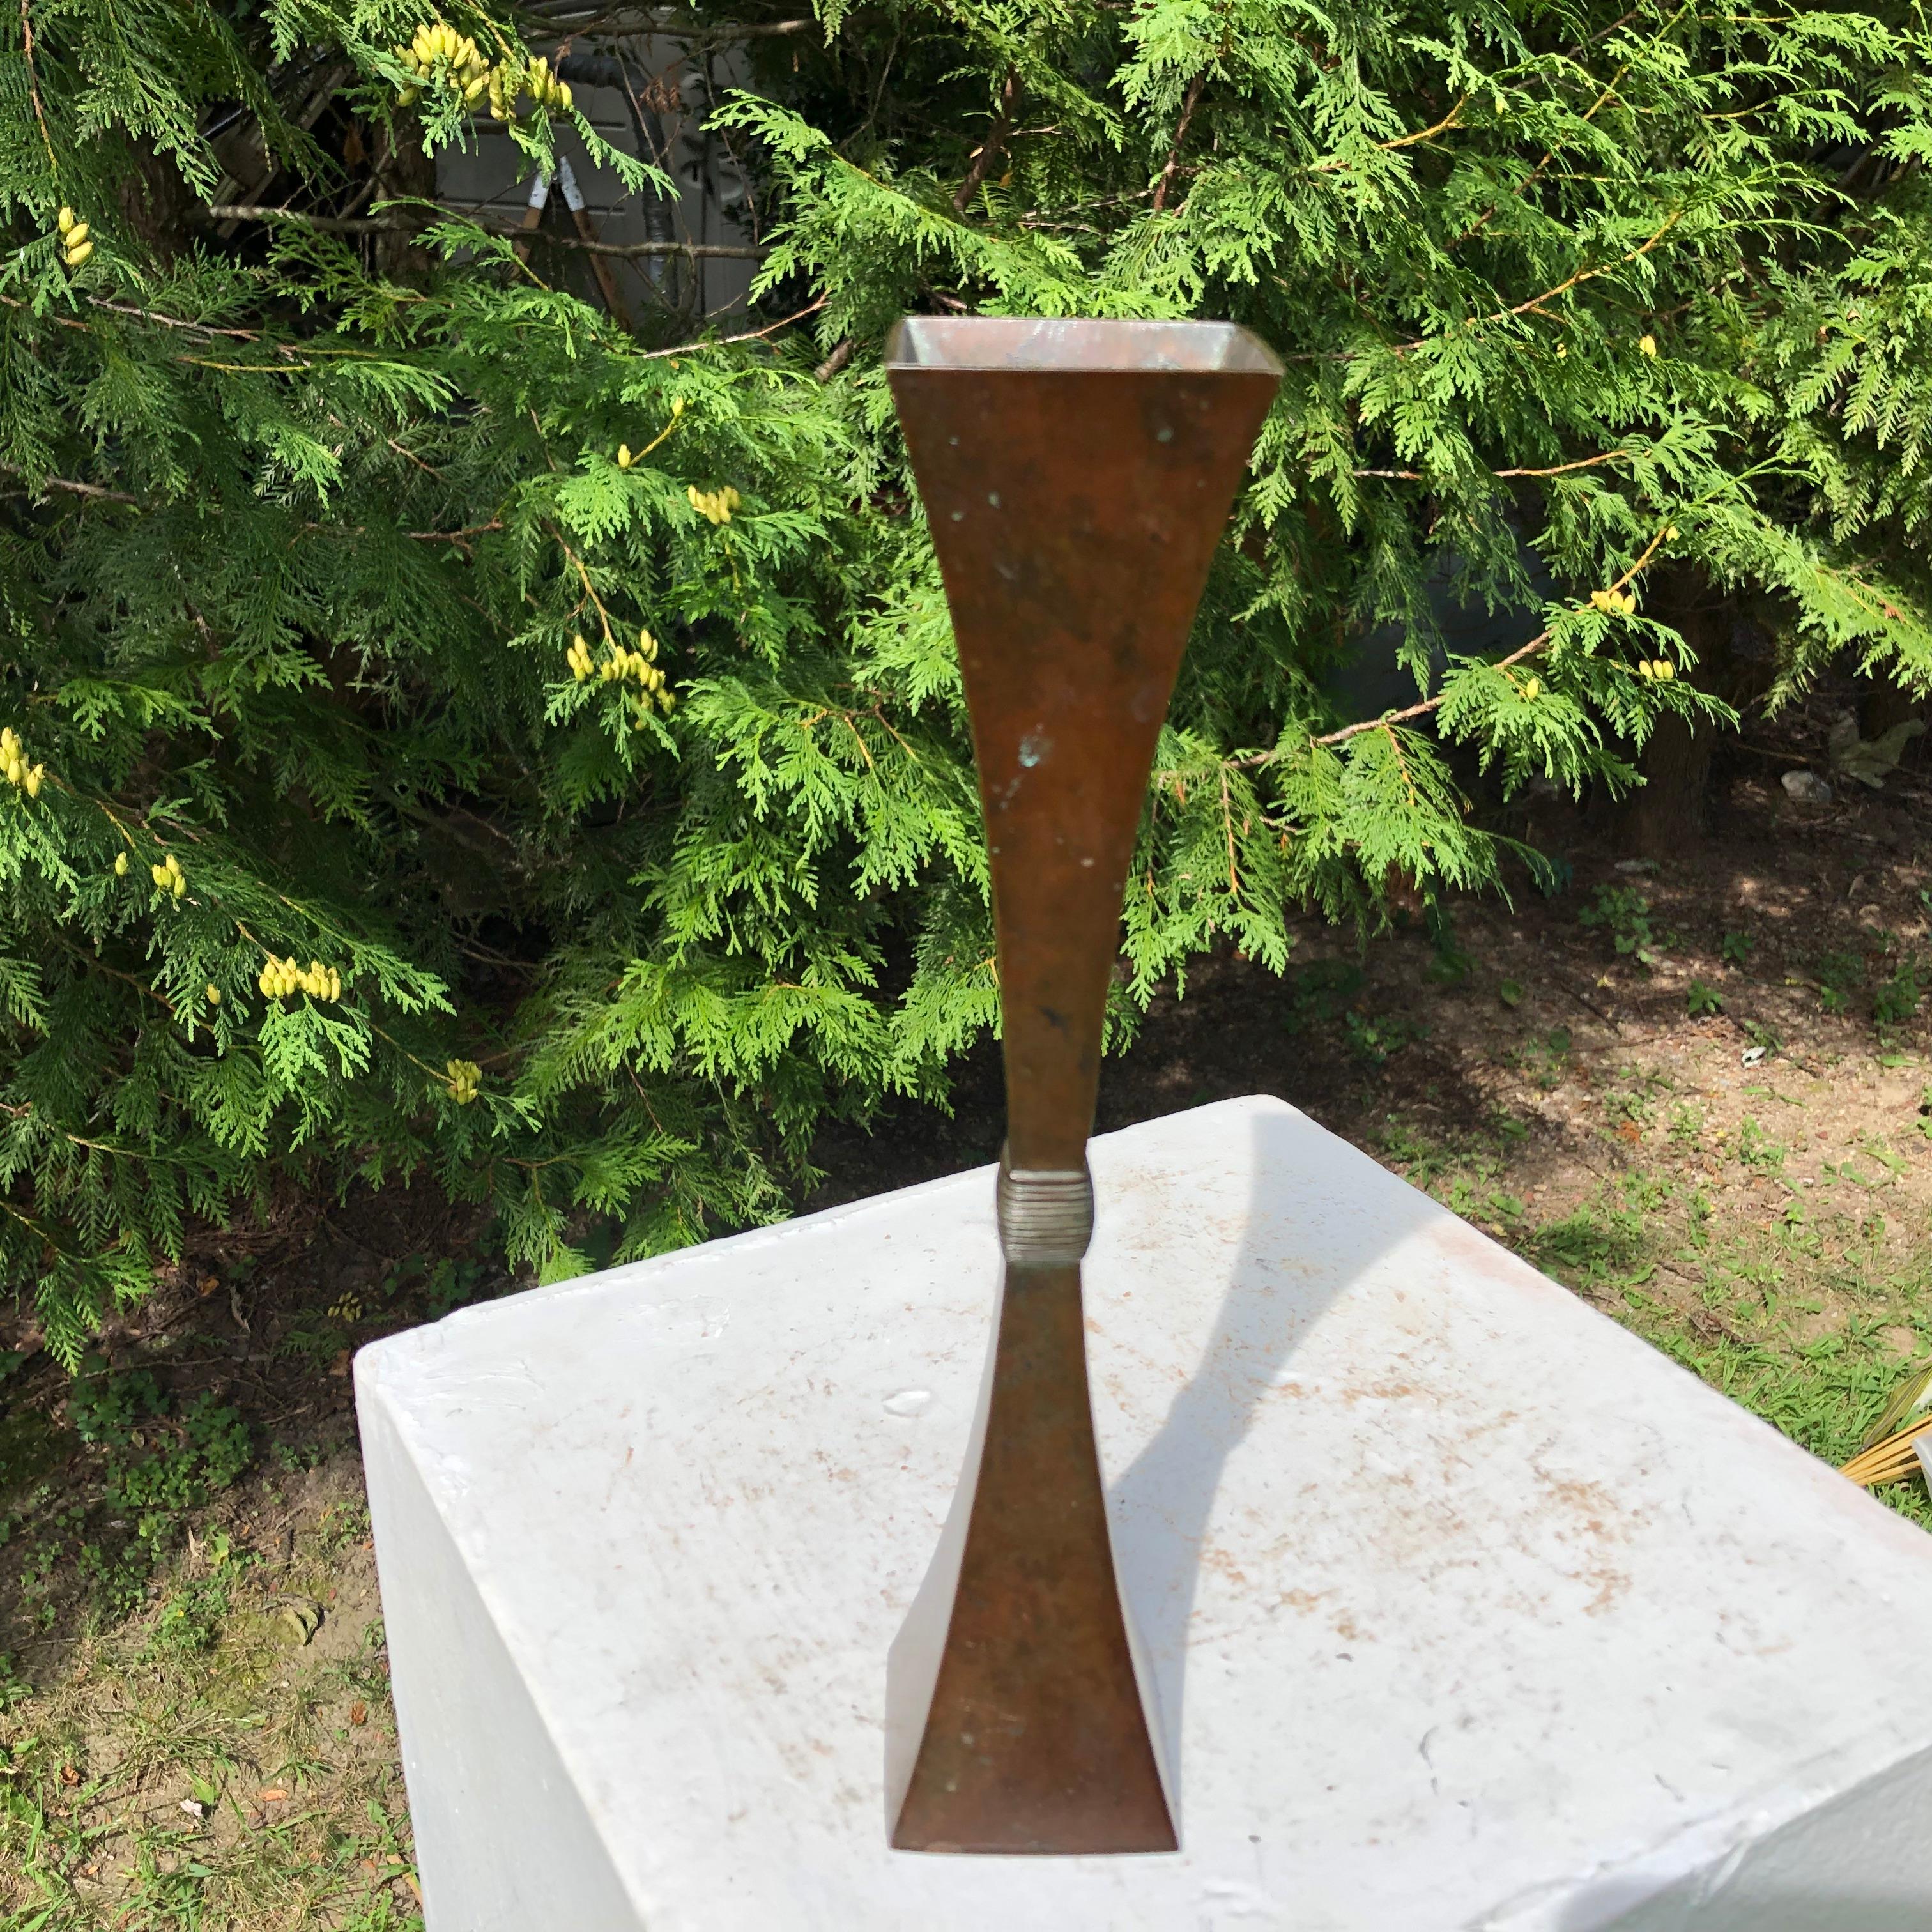 A fine old Japanese hand cast bronze bud vase. Signed by artist Koshun

Attractive seldom seen design.

Fine condition. Finely cast in a simple form in a an attractive red bronze color. 

A great table setter or wonderful decorative accent for